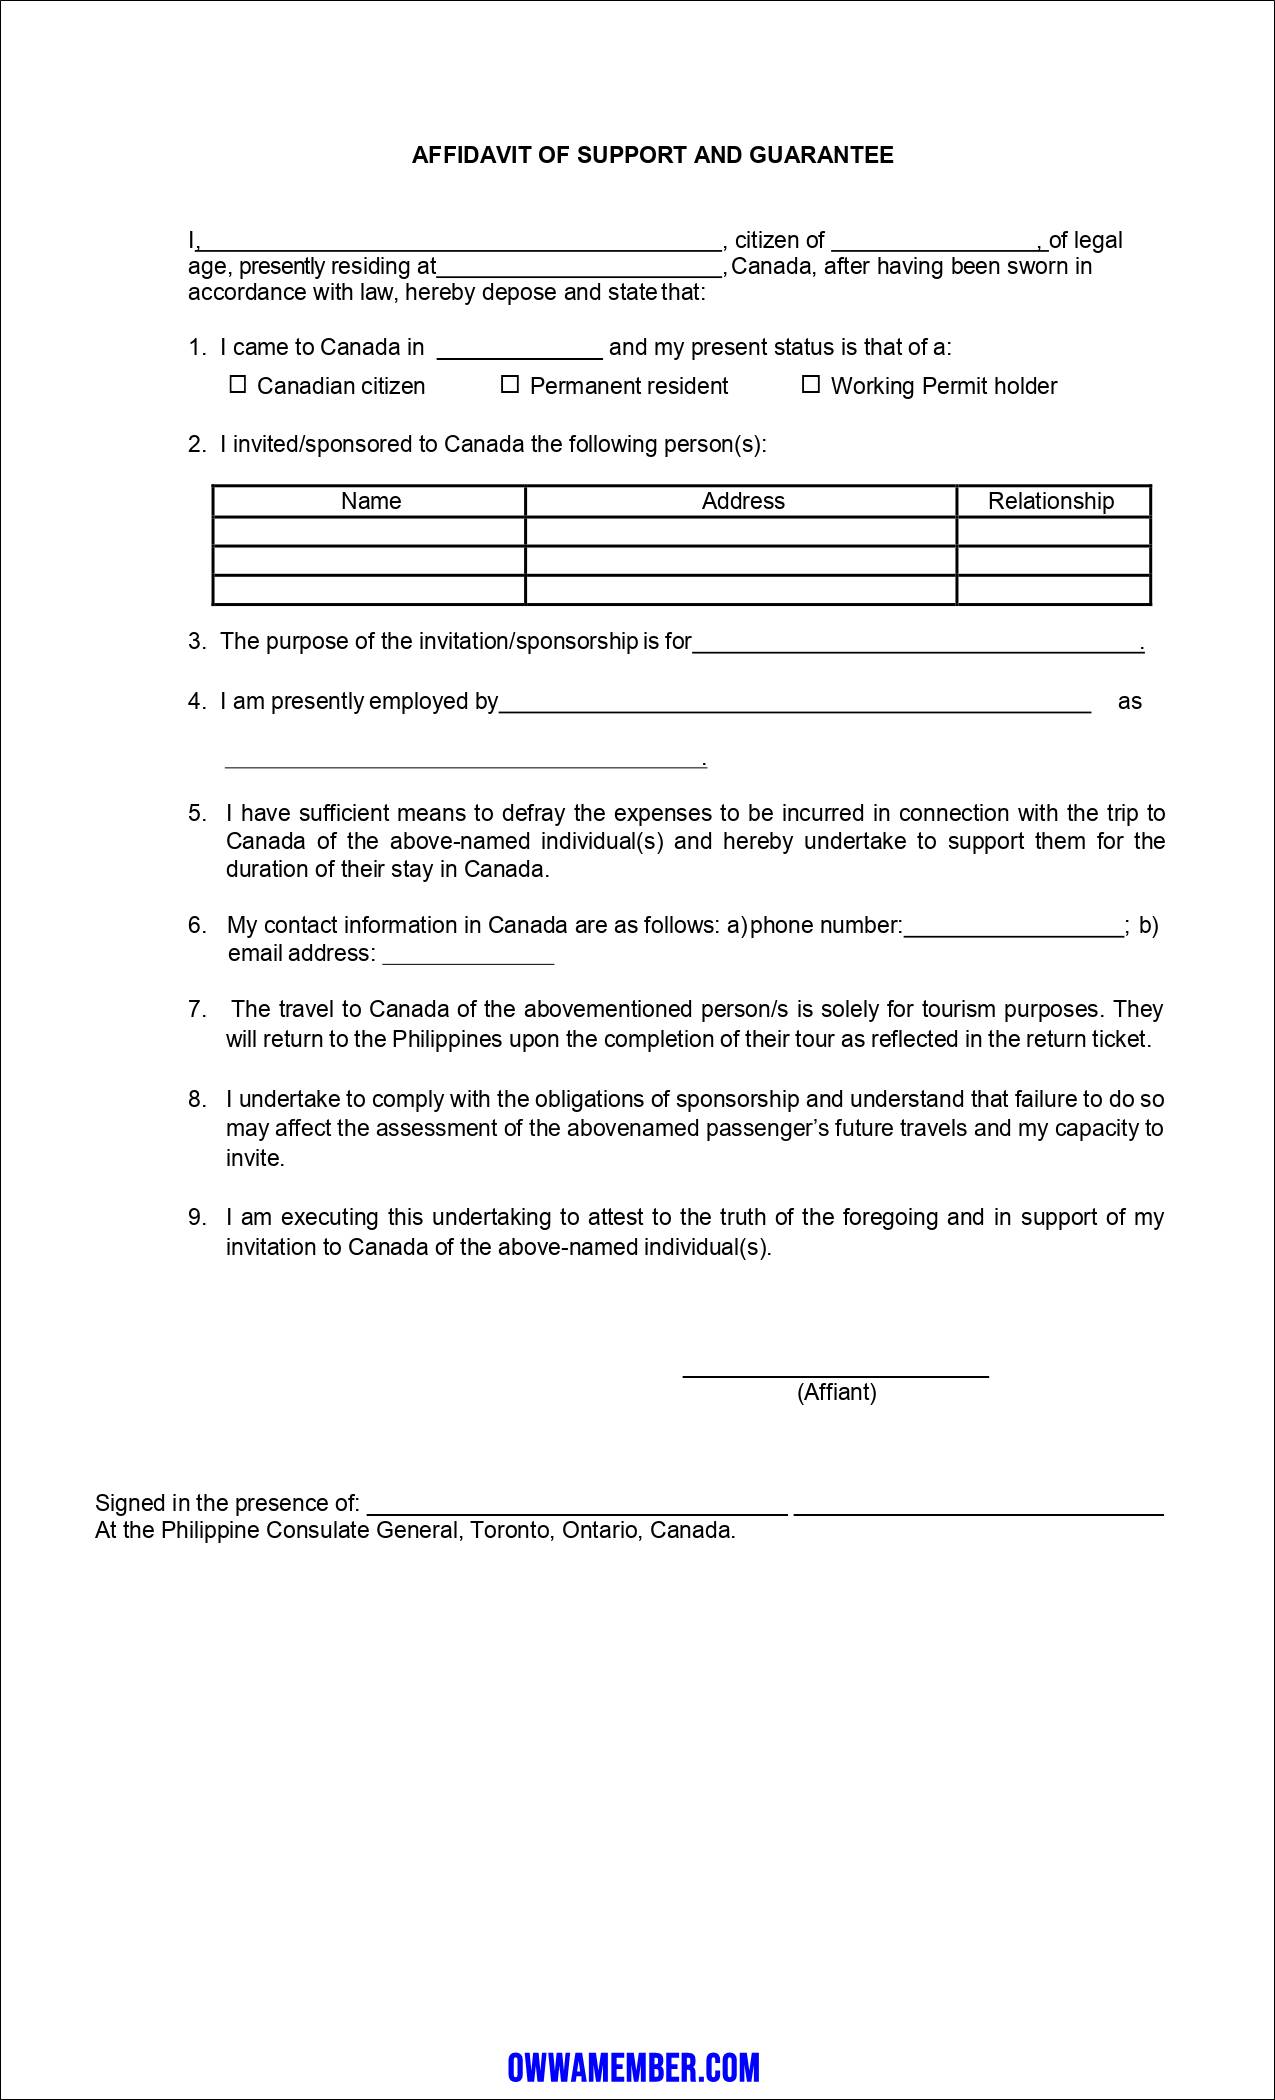 Affidavit of Support Guarantee Toronto Canada template form_page-0001